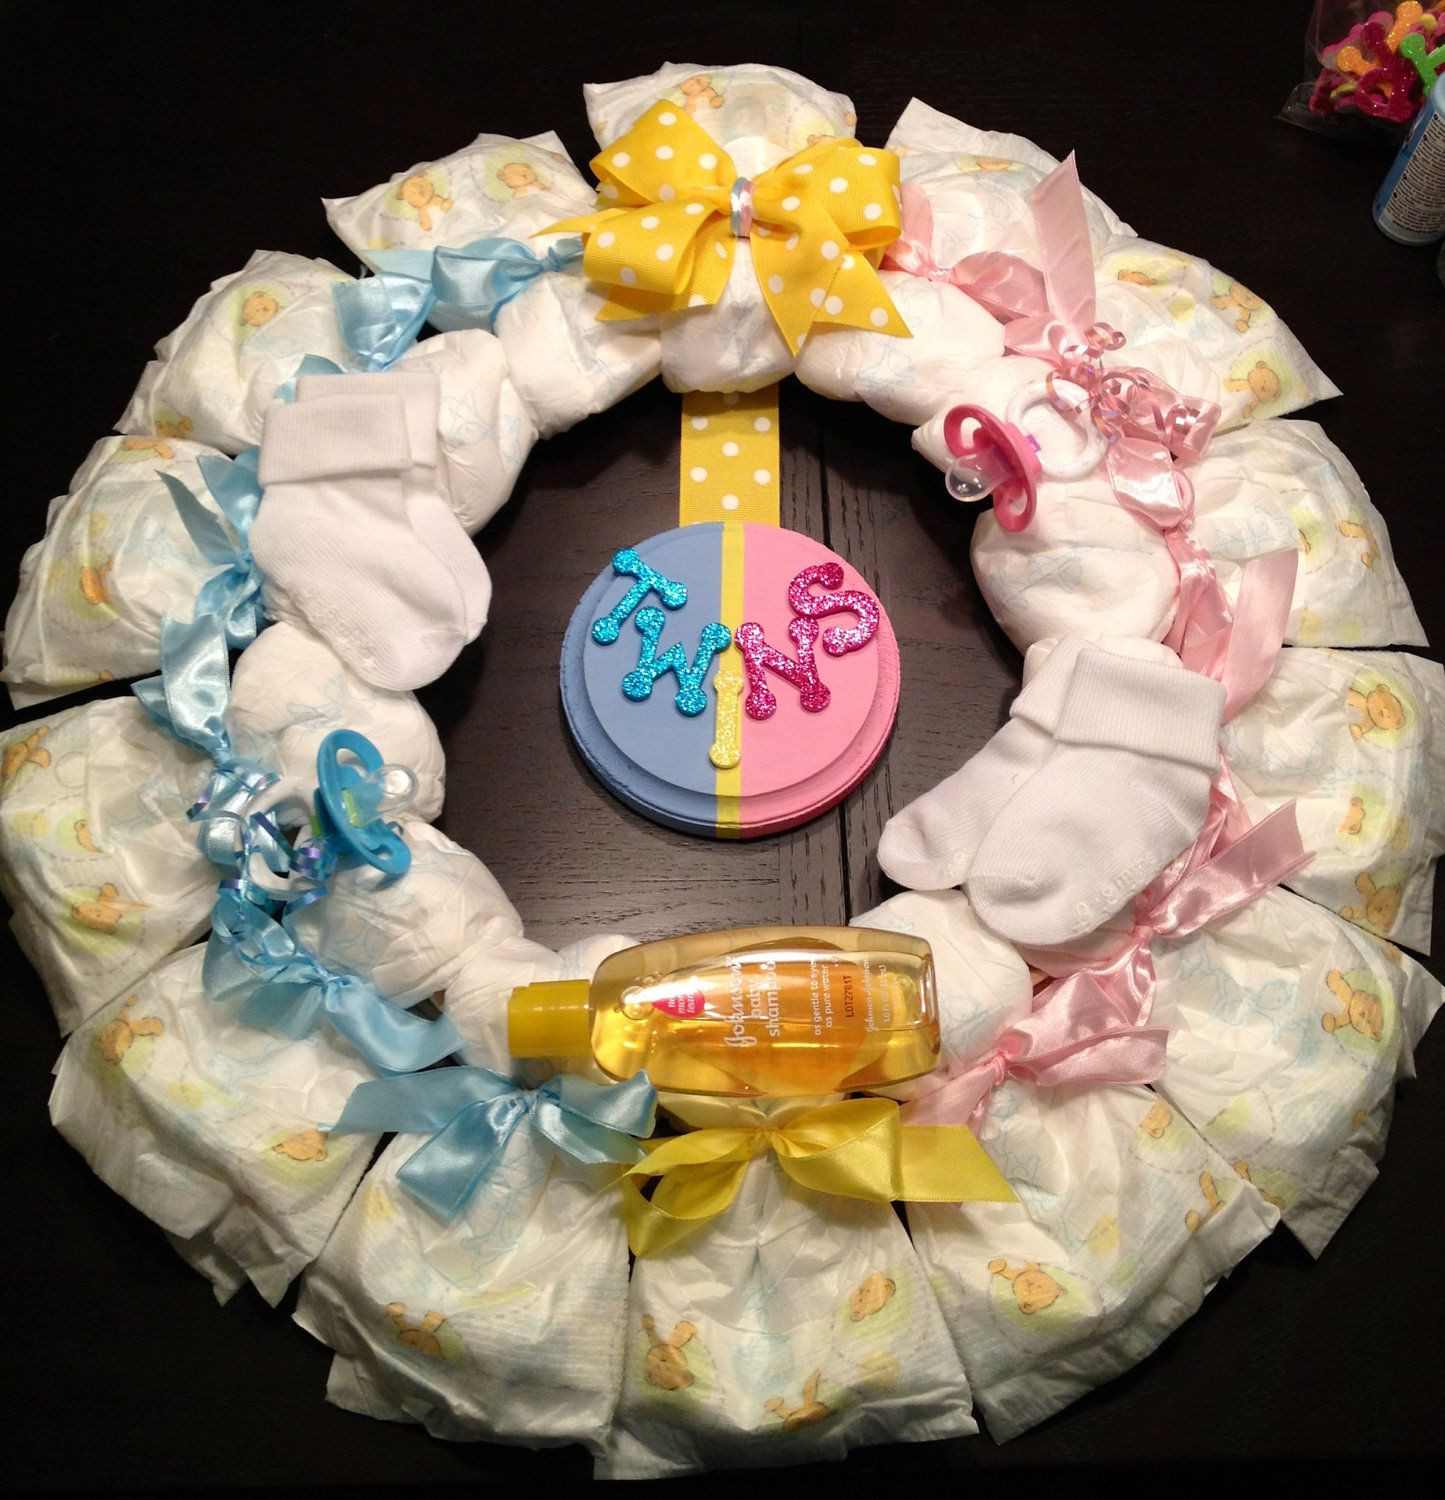 Twin Baby Shower Gift Ideas
 TWINS DIAPER WREATH Baby Shower Gift Custom Decoration